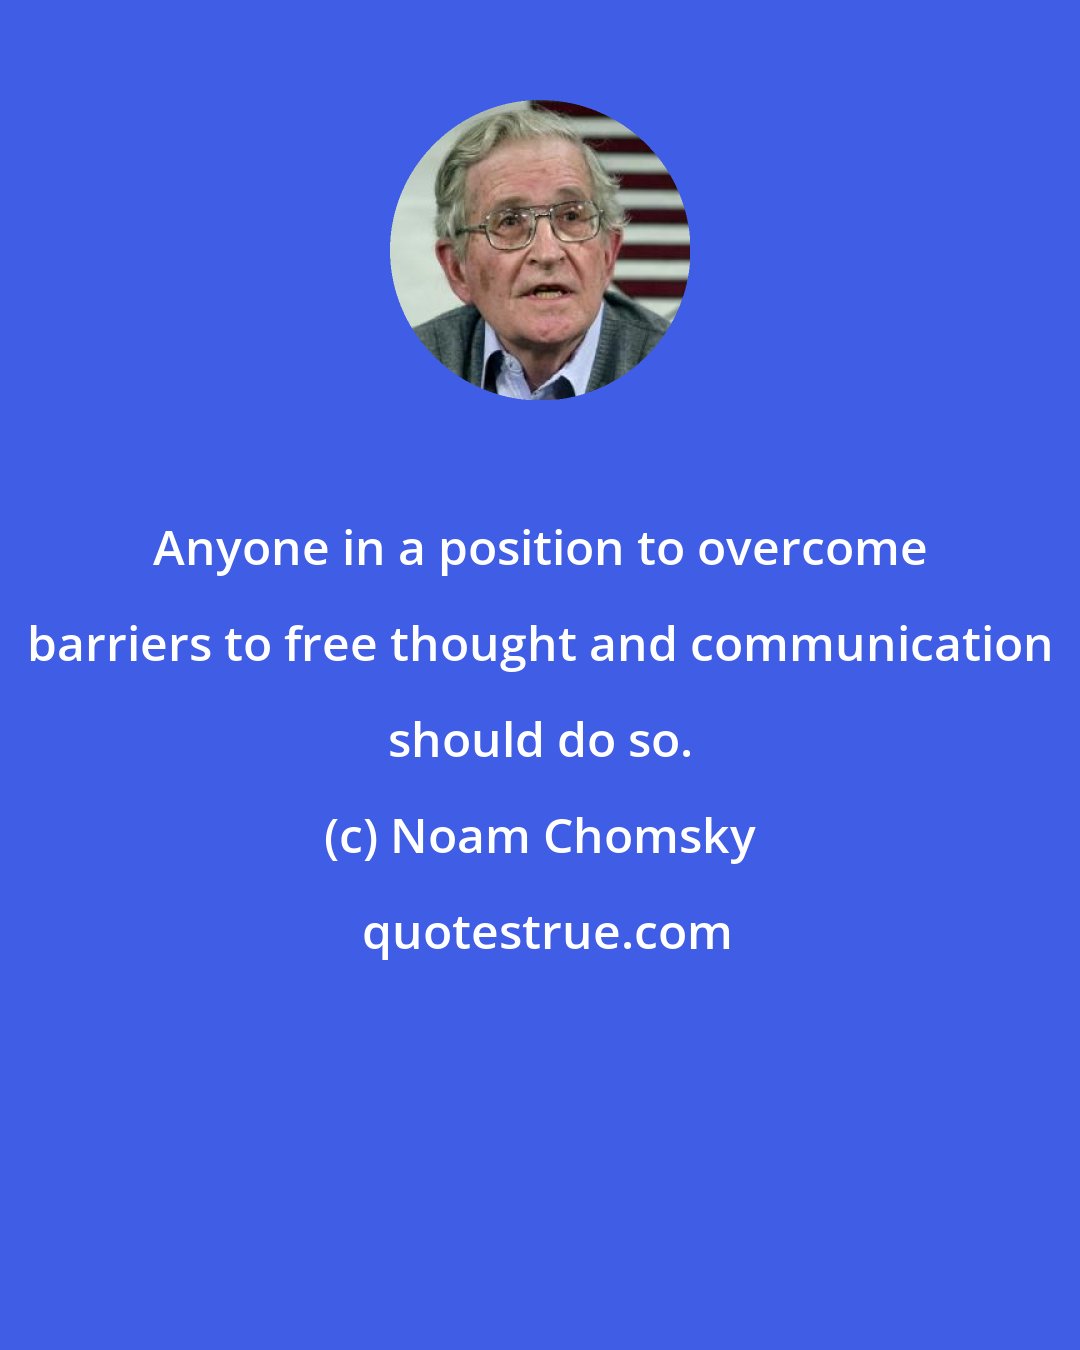 Noam Chomsky: Anyone in a position to overcome barriers to free thought and communication should do so.